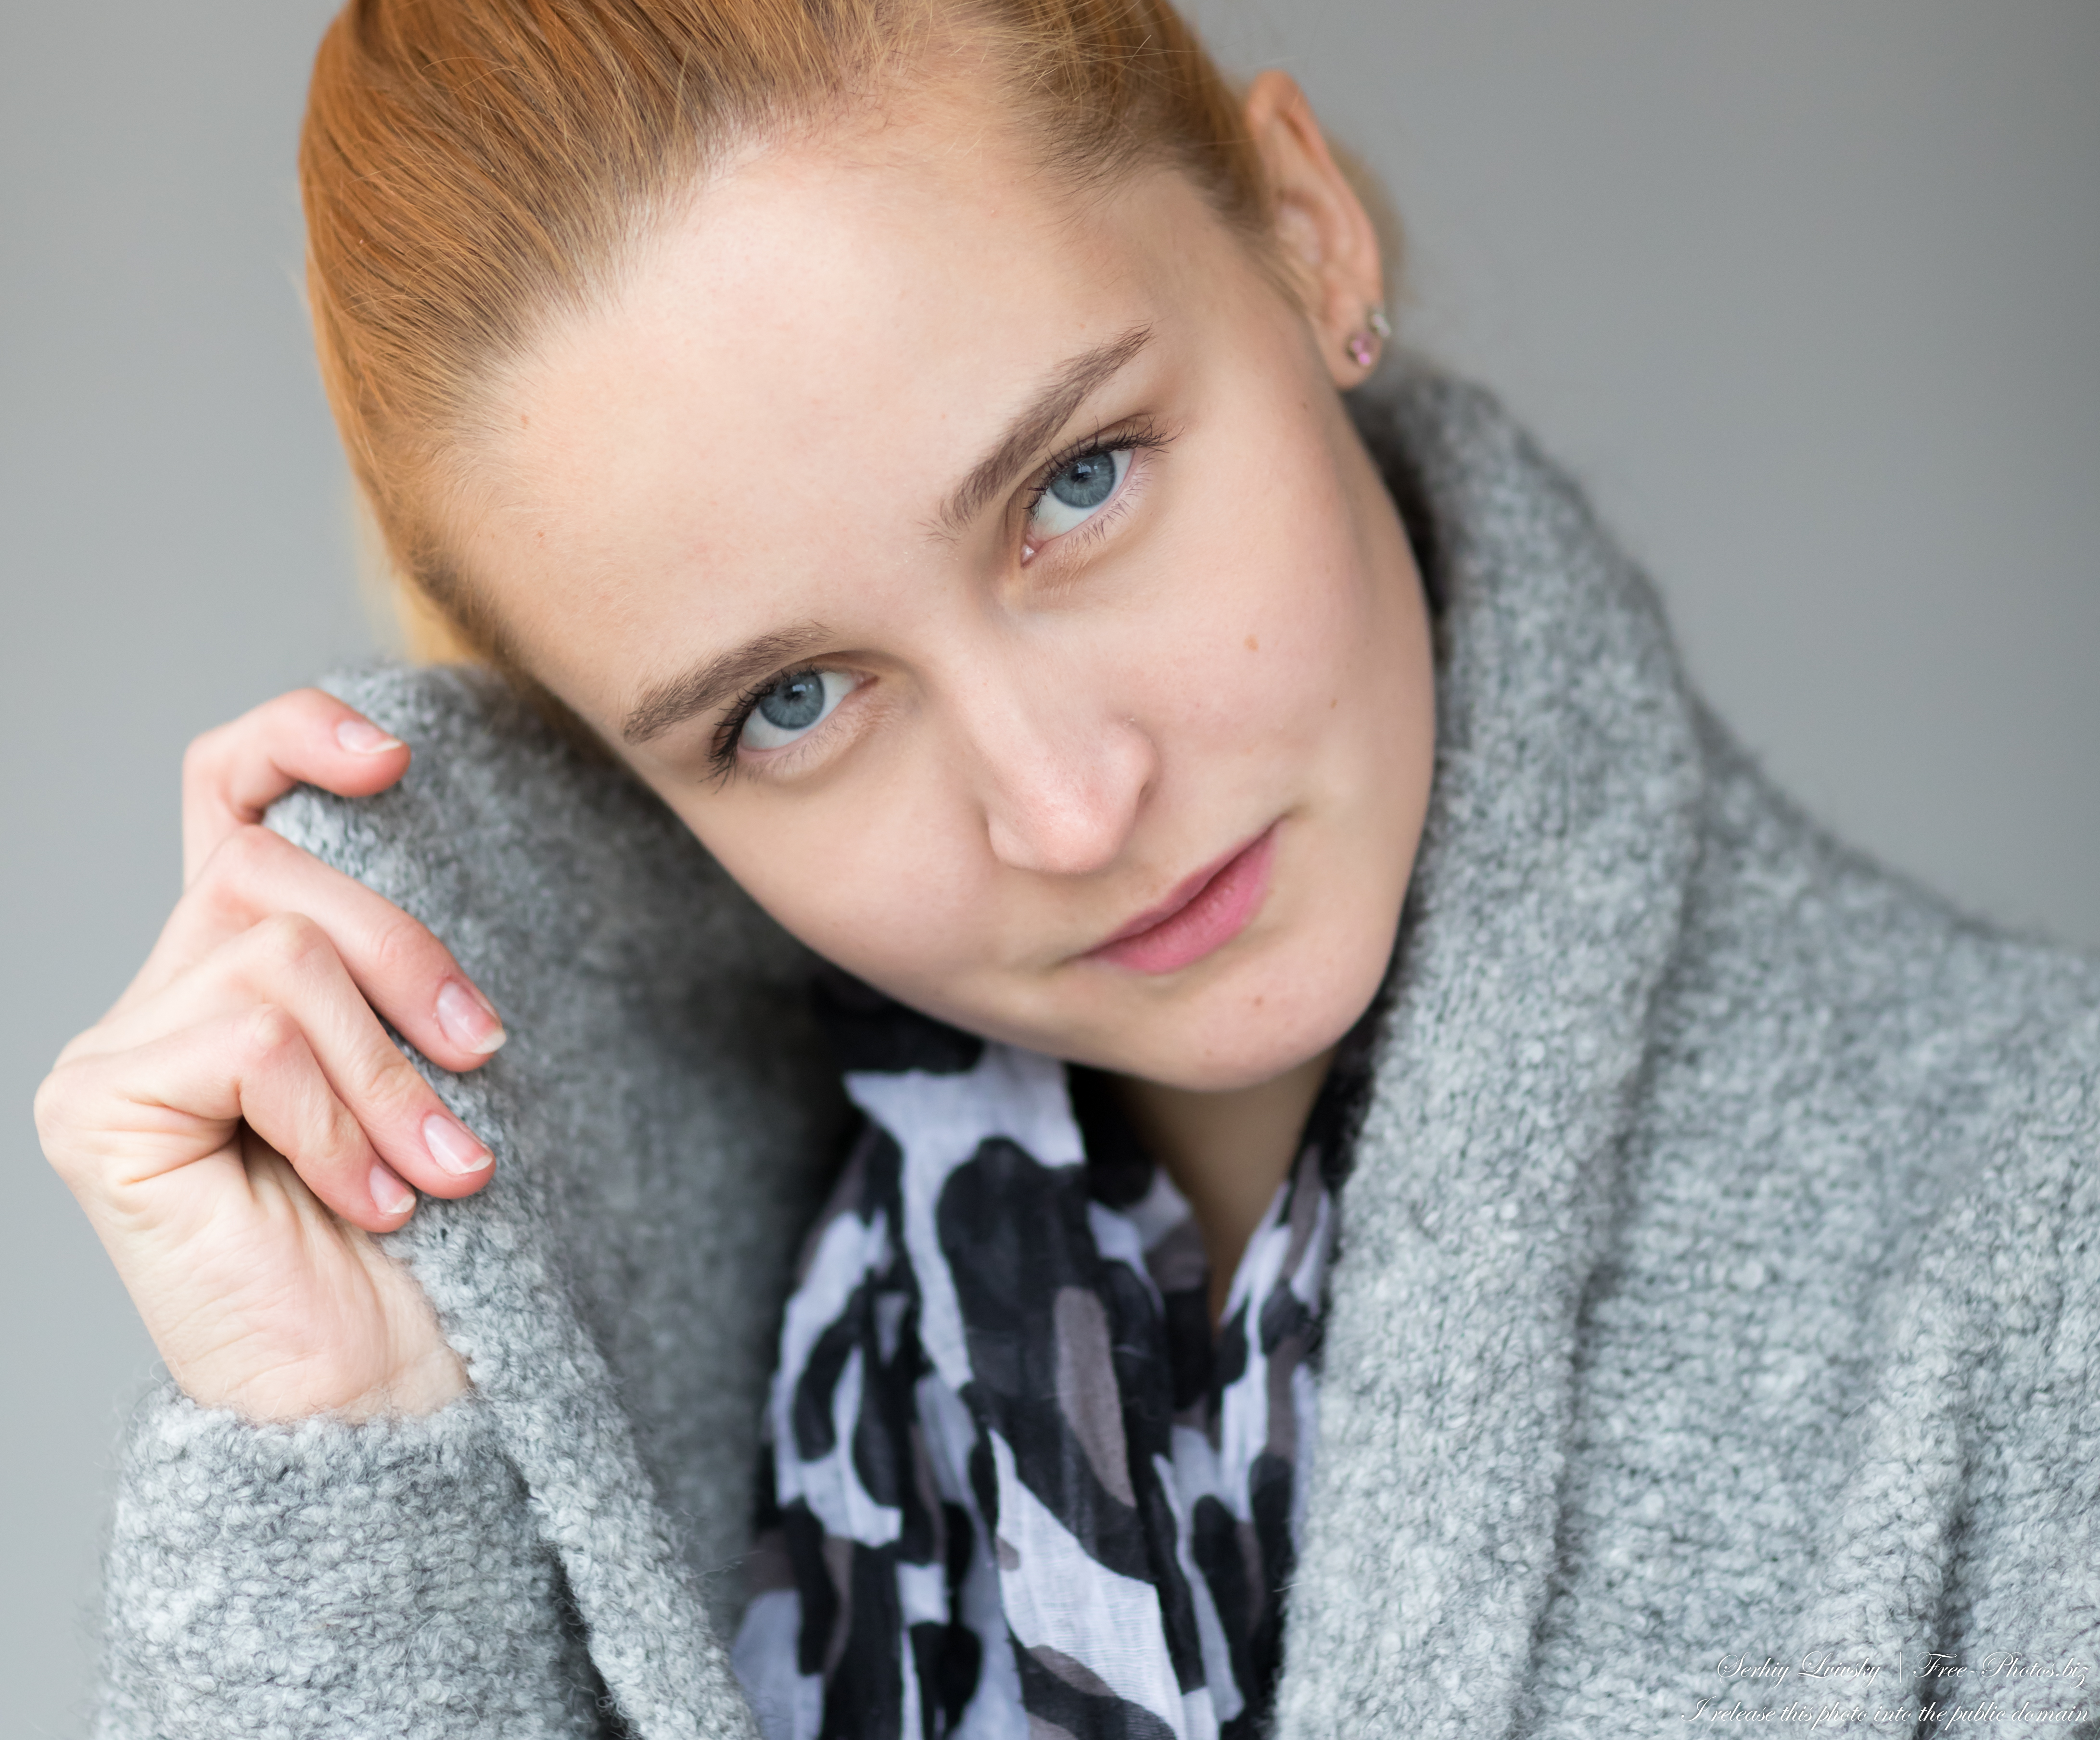 Ksenia - a 25-year-old girl with blue eyes and dyed hair photographed in November 2021 by Serhiy Lvivsky, portrait 4